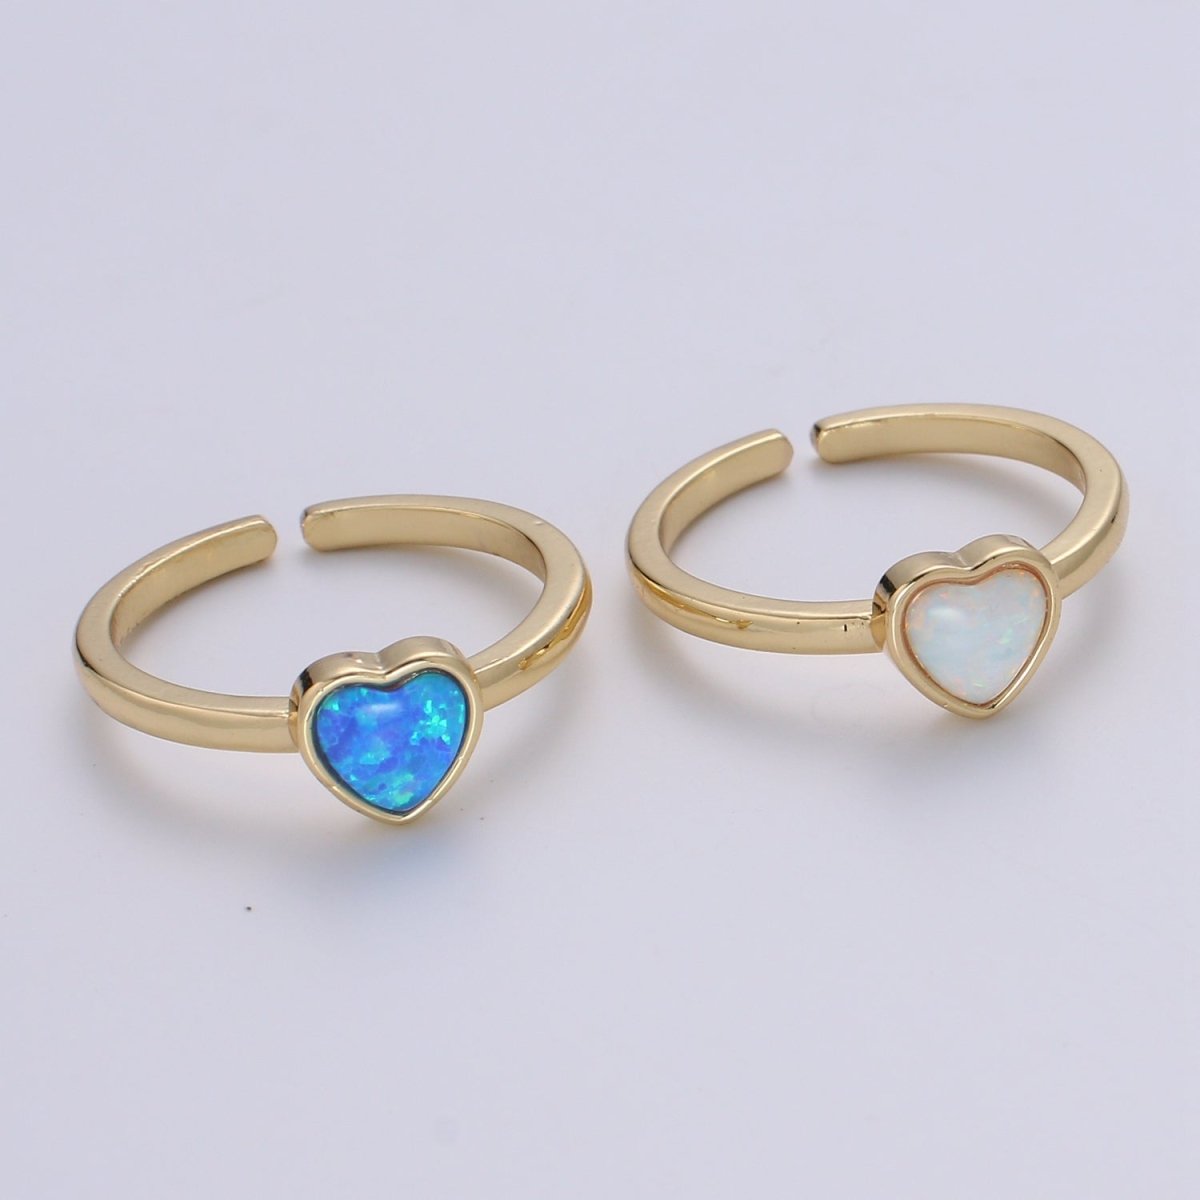 1pc 24K Gold Opal Ring, Love Opal Open Adjustable Ring, Solitaire White Opal Lab Heart Design Band Jewelry R528 R529 - DLUXCA